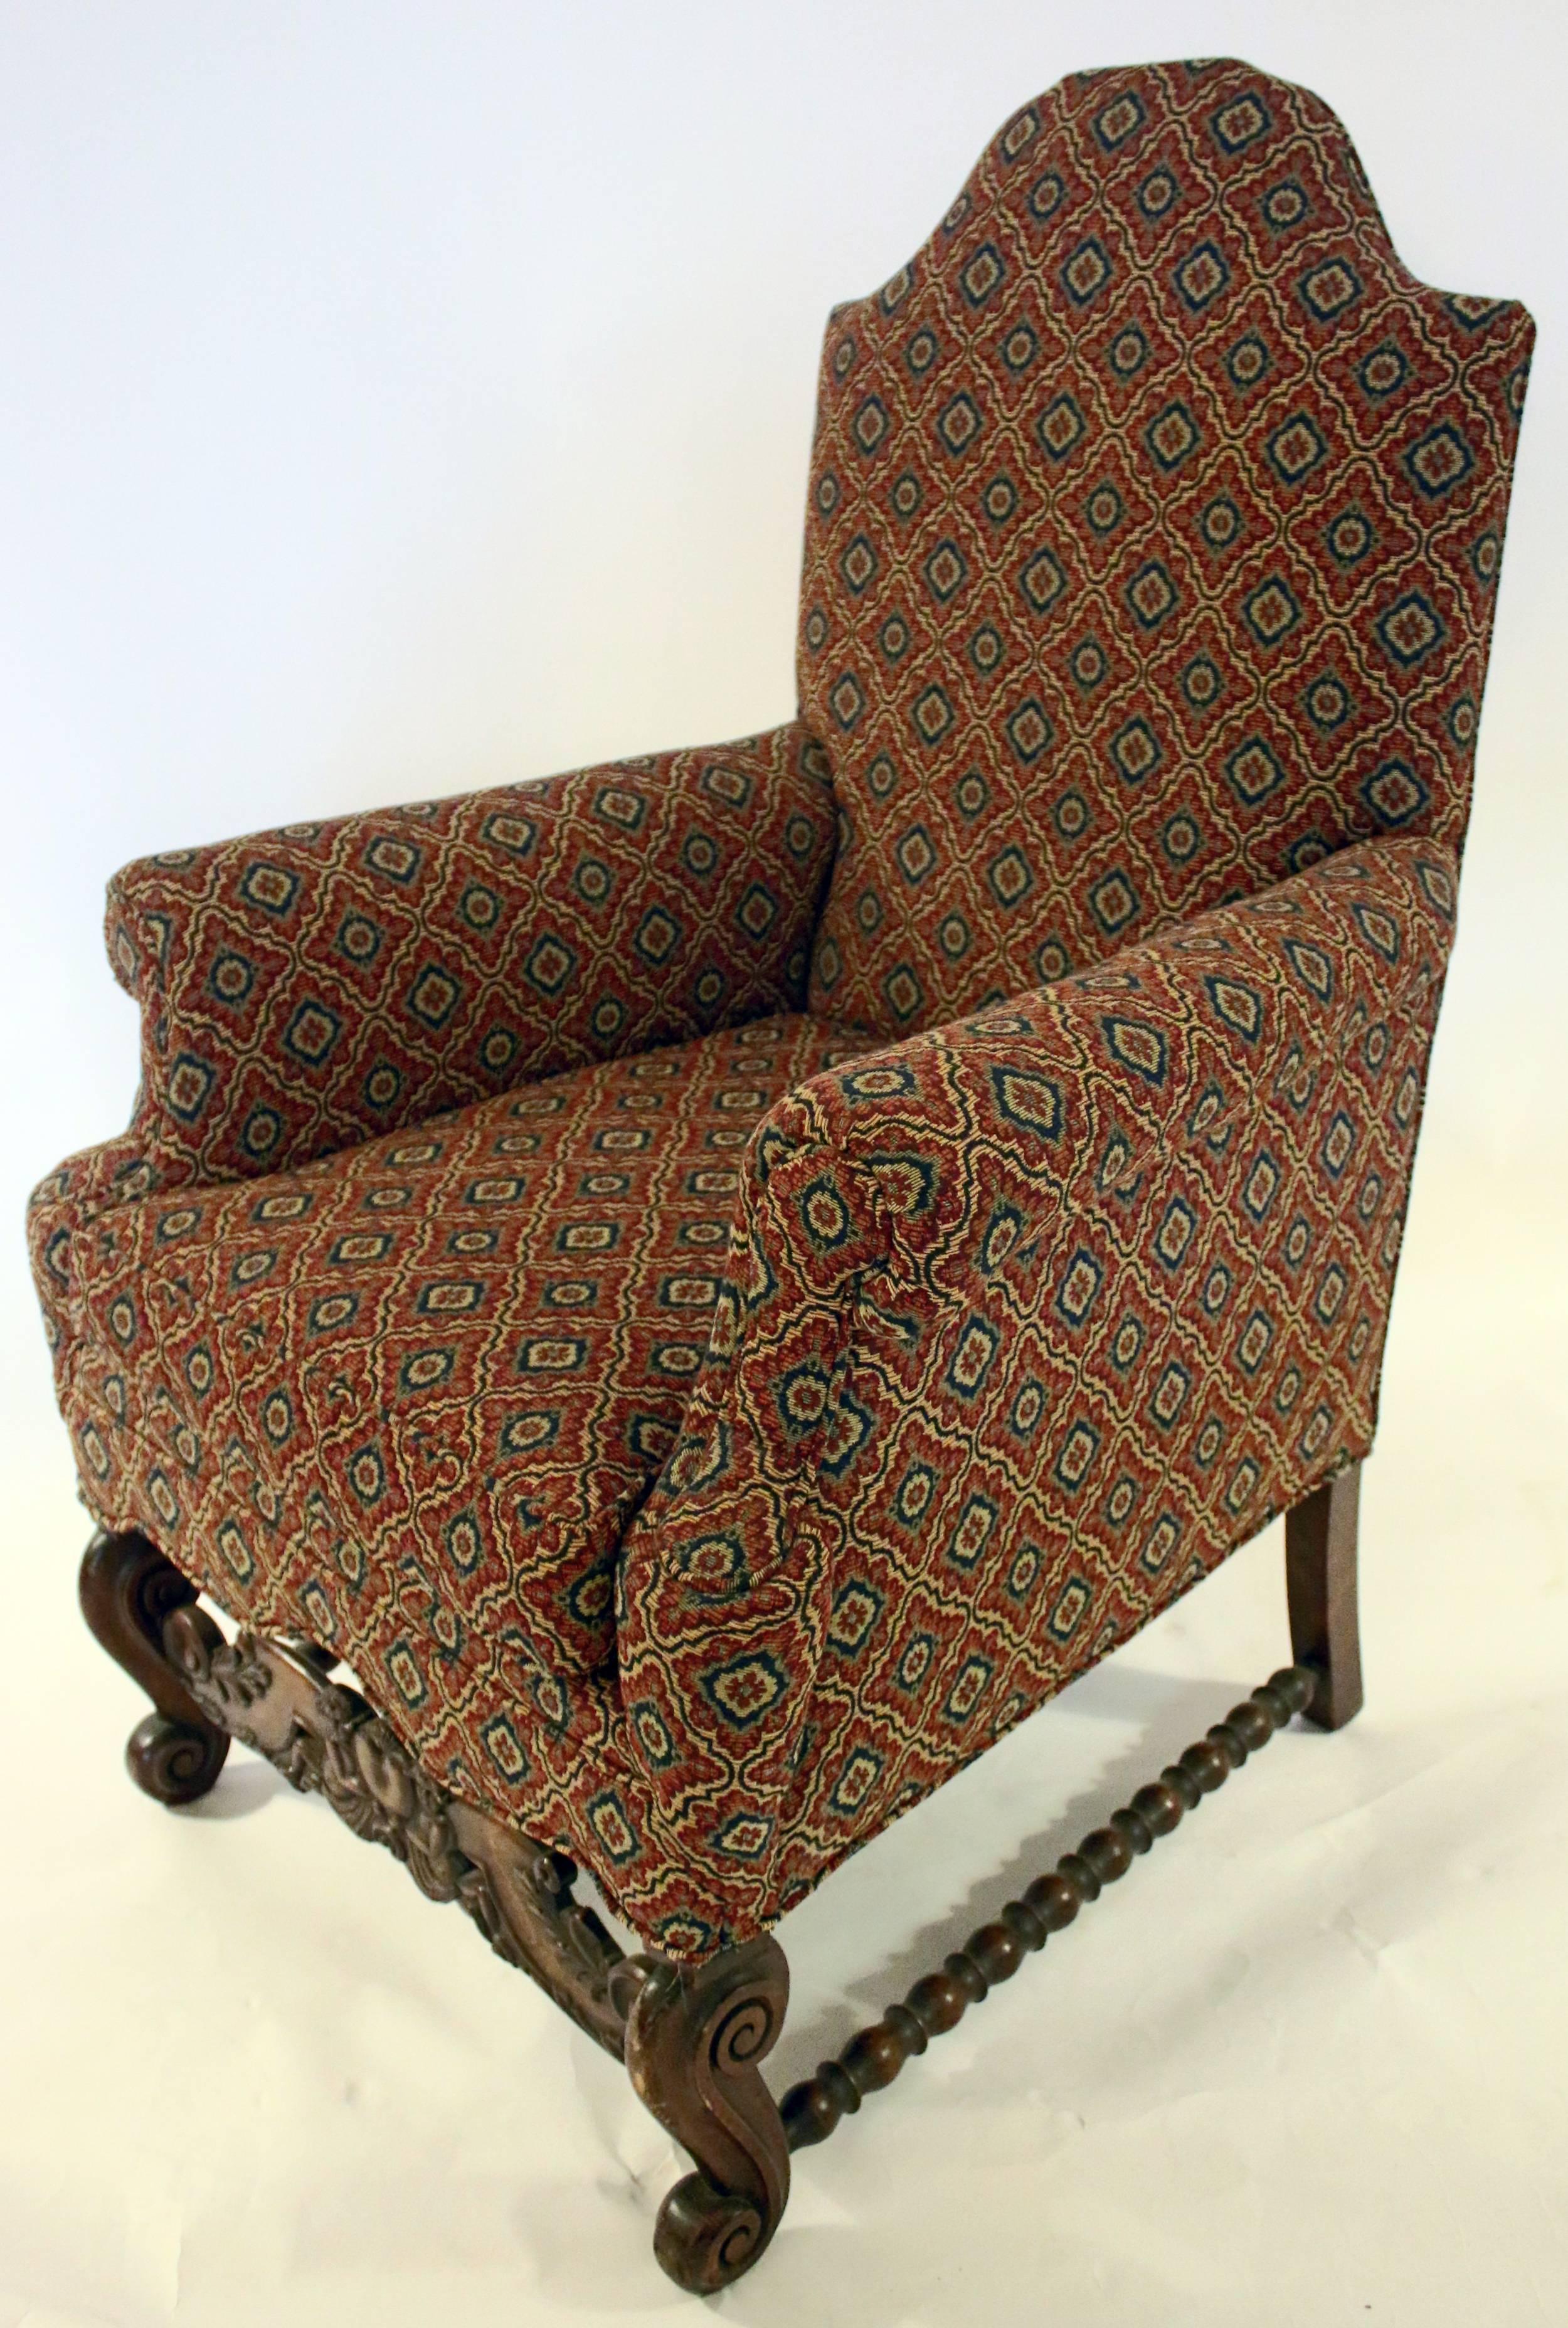 Pair of upholstered armchairs in the Jacobean revival style, circa 1890s. Features include a slight domed back and flared arms. Constructed on very sturdy frames of English walnut, the front bases are carved in a heart shape with a cherub on either